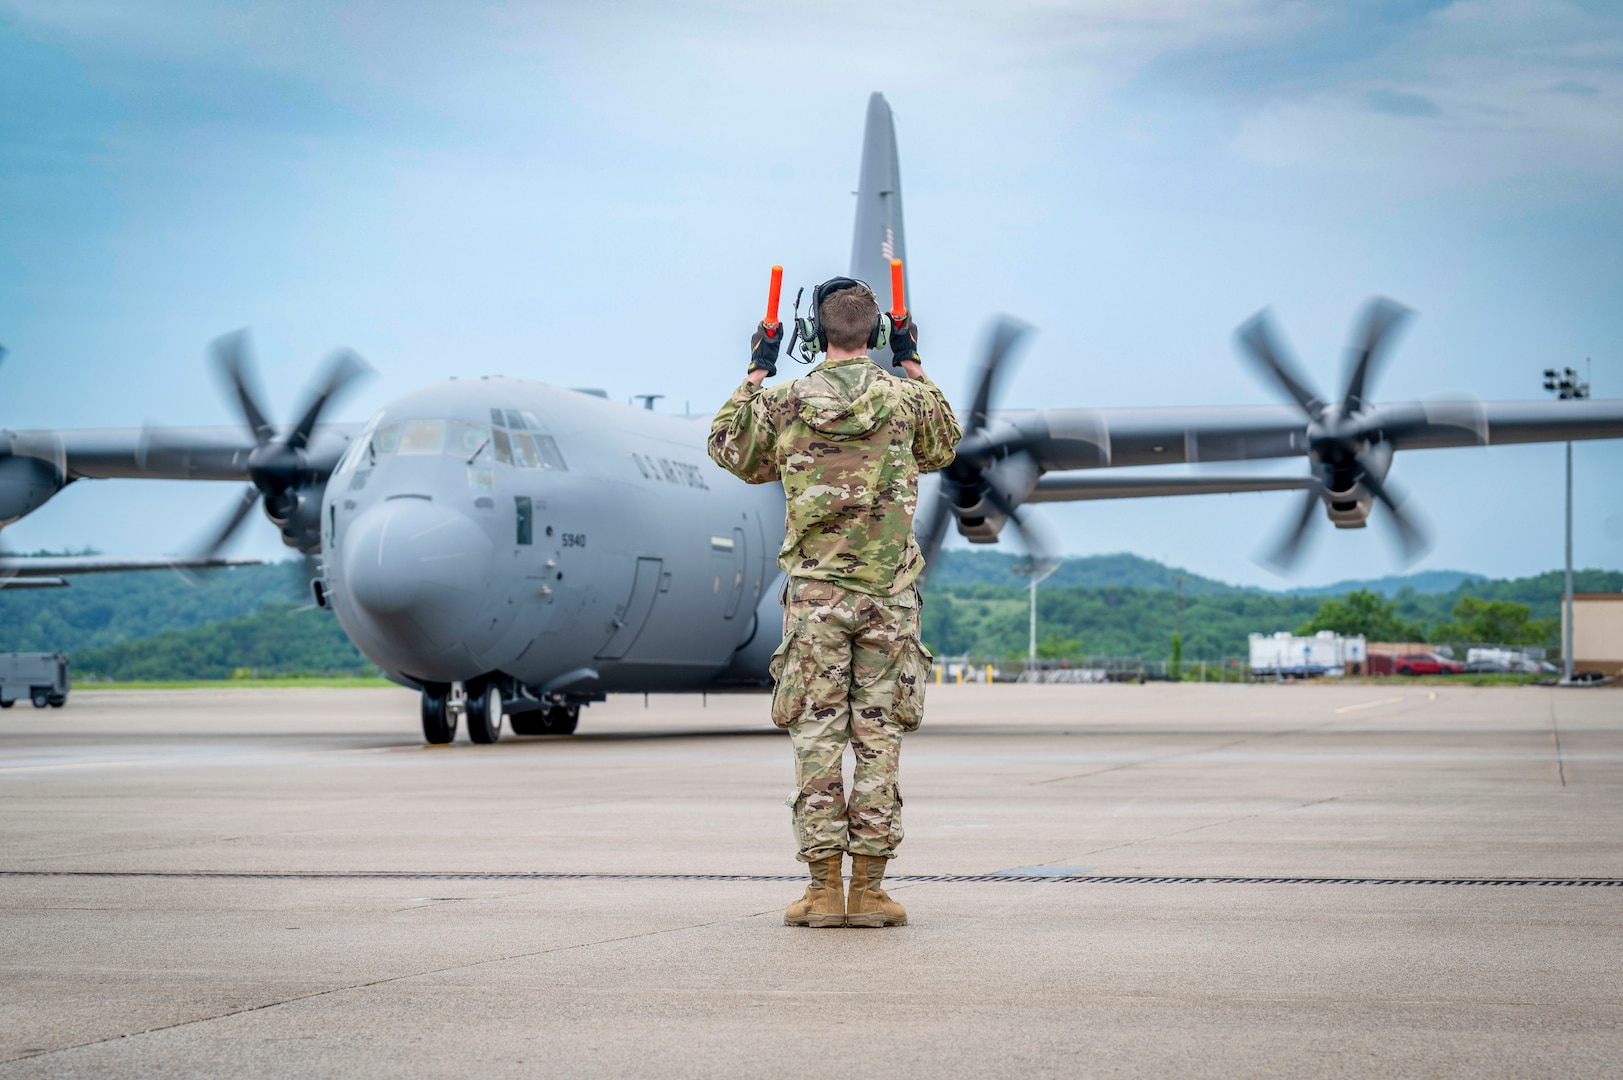 The 130th Airlift Wing has met the requirements to be declared a C-130J-30 unit with Initial Operational Capability as of Jan. 1, 2024, the West Virginia National Guard announced. The 130th has been in the process of transitioning airframes from the C-130 H3 Hercules model to the advanced C-130J-30 Super Hercules model since 2021.